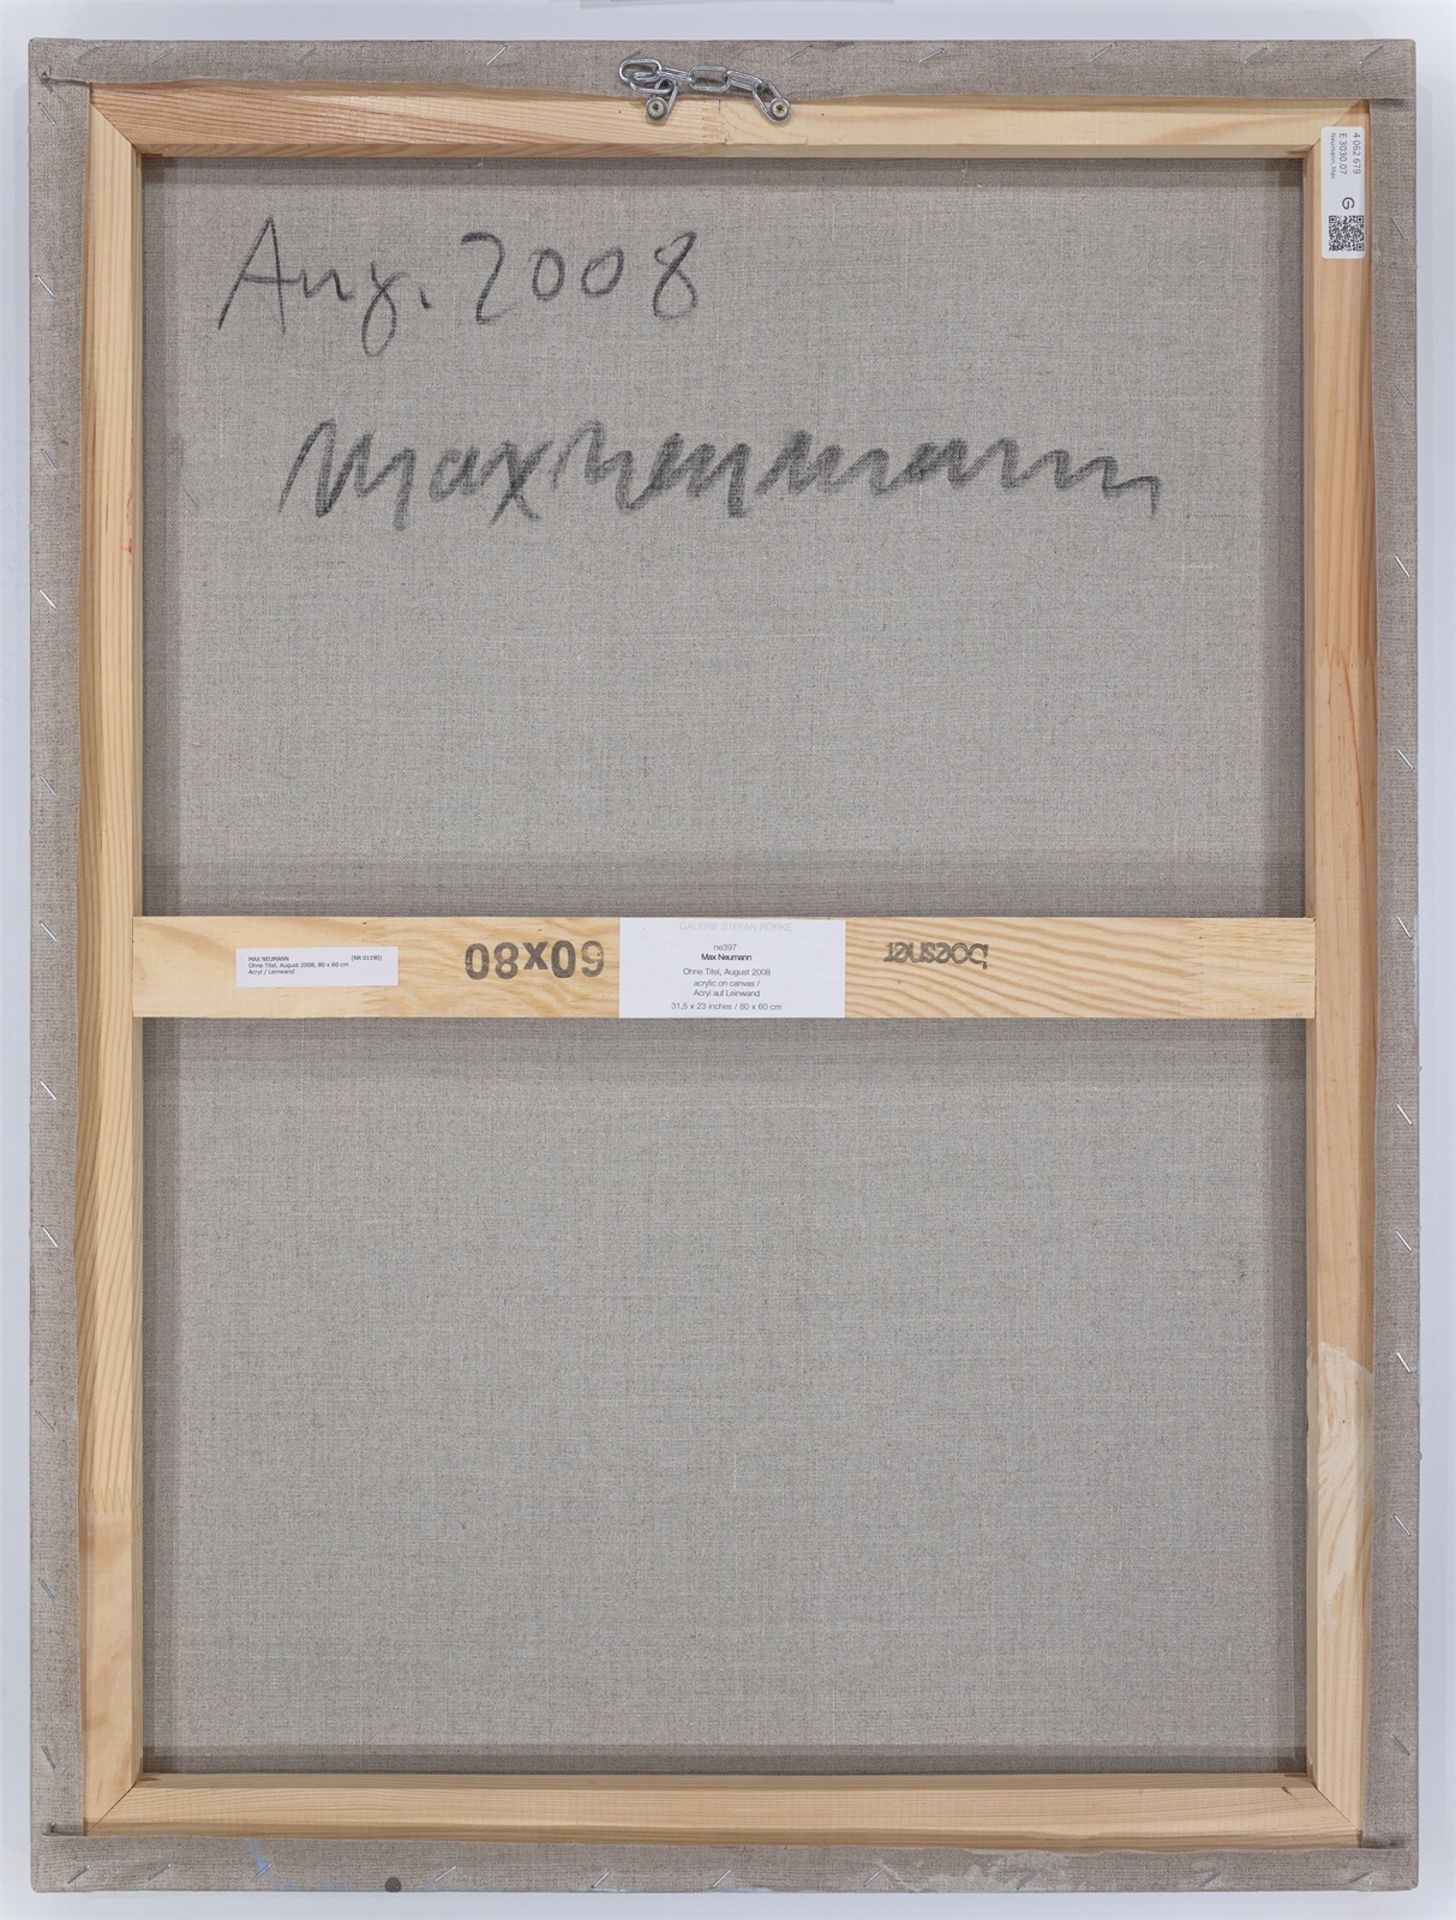 Max Neumann. Untitled. 2008 - Image 3 of 4